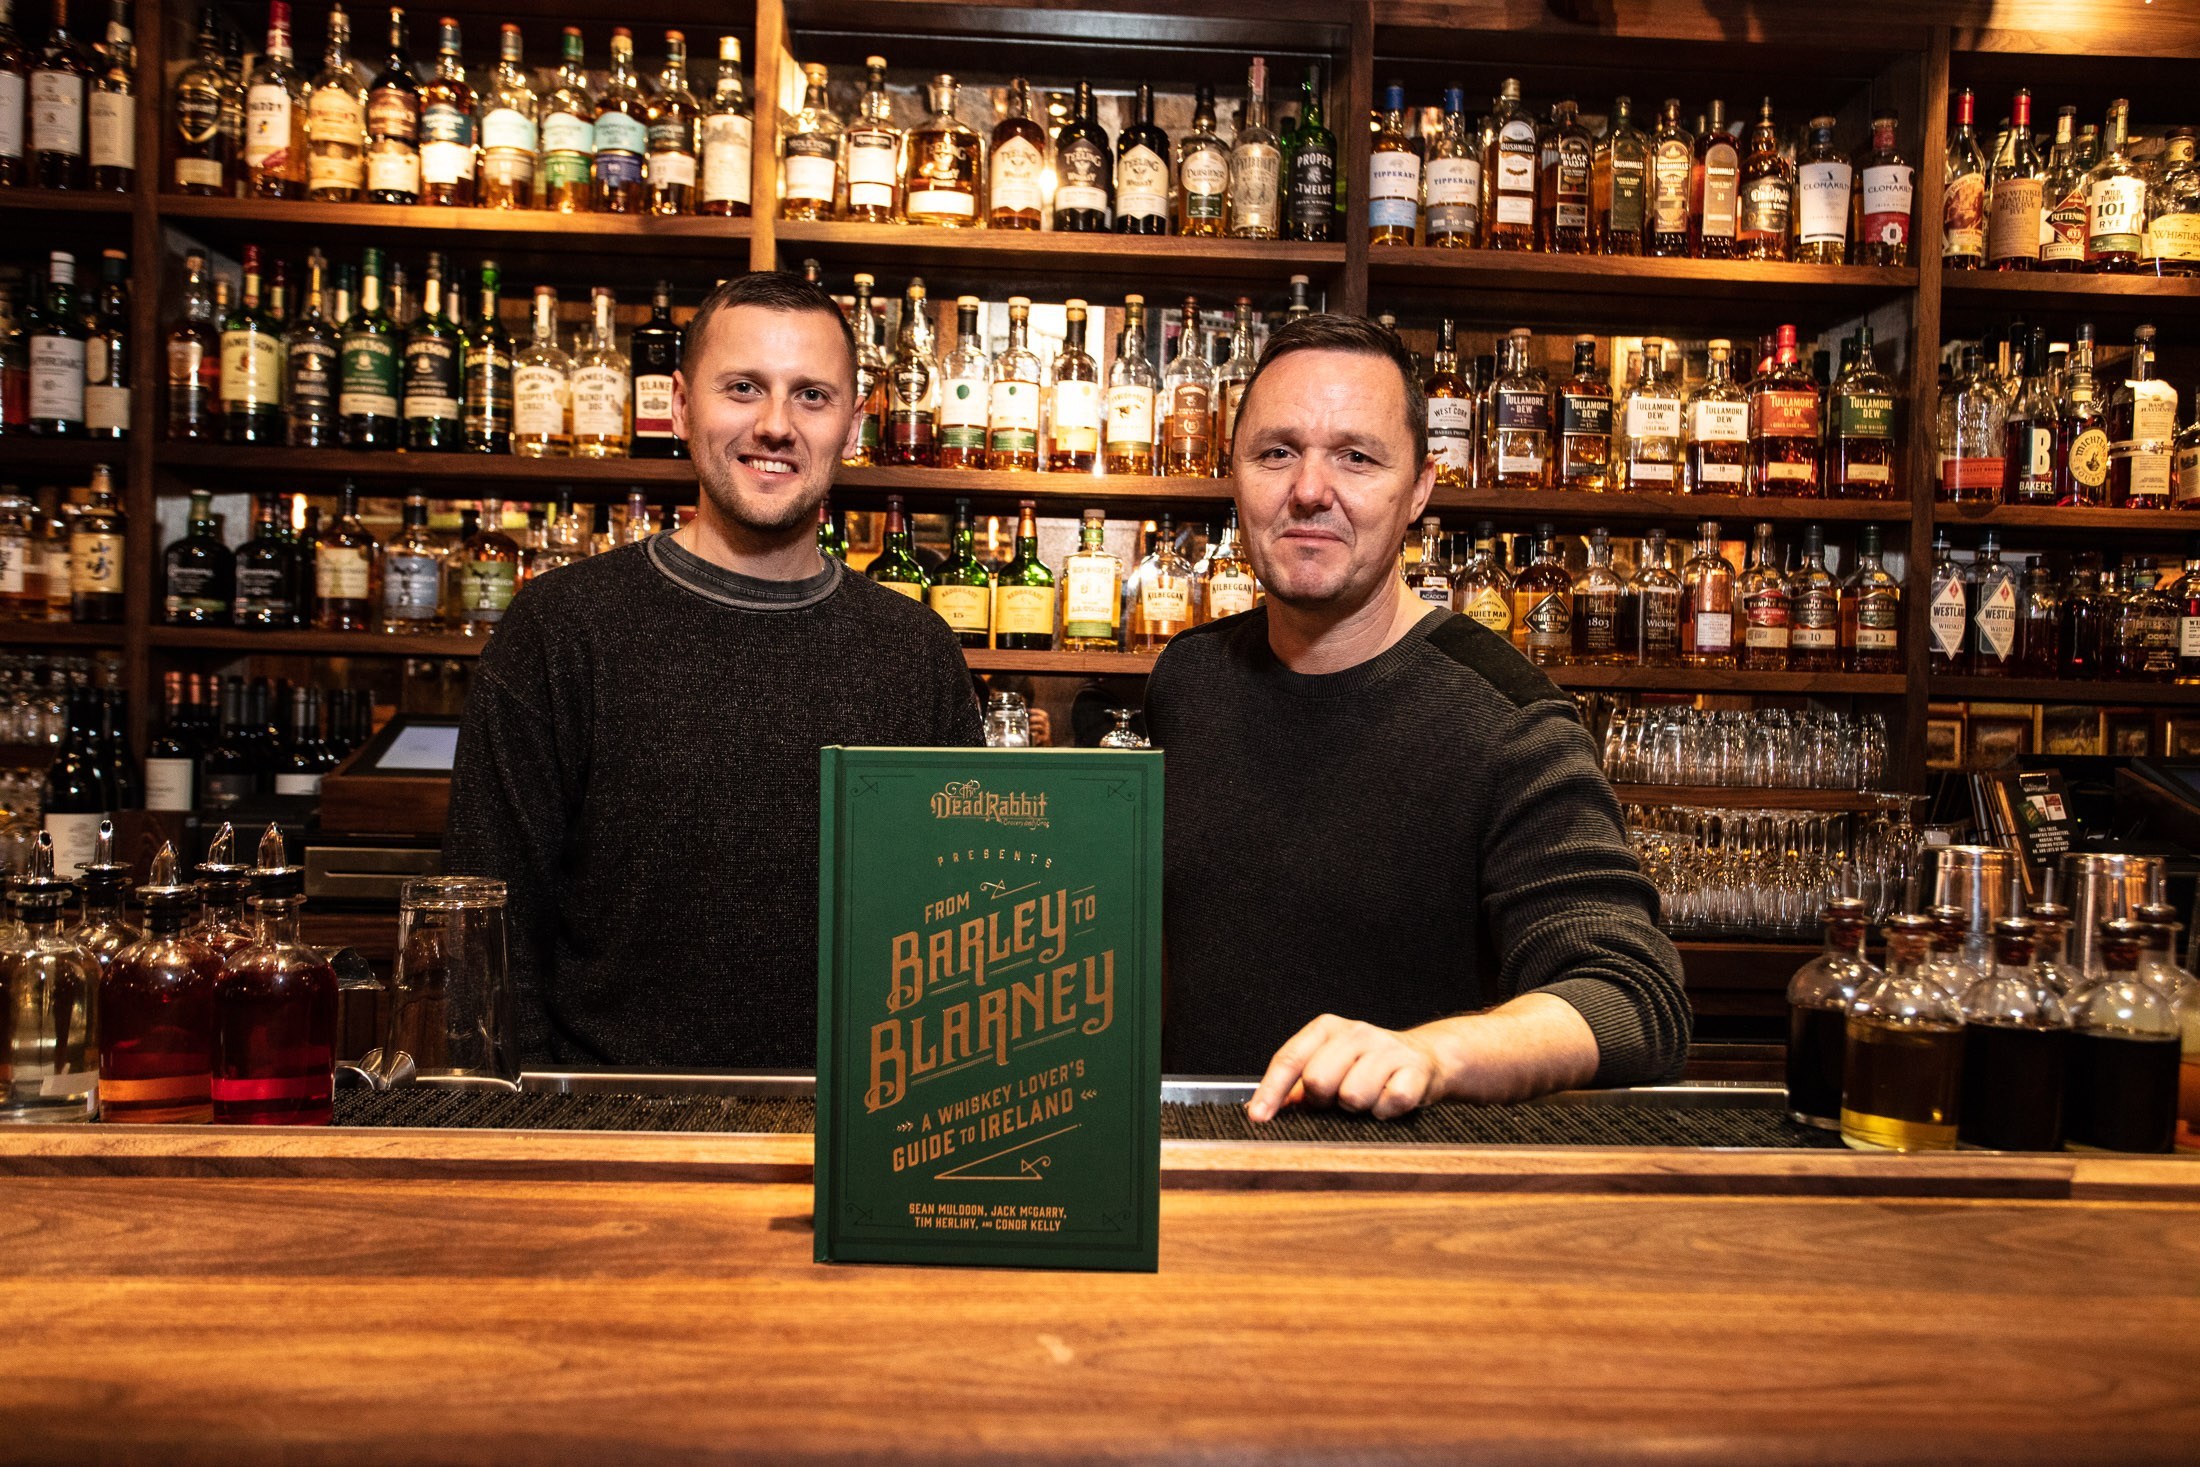 The Dead Rabbit Launches New Book, “from Barley To Blarney, A Whiskey Lover’s Guide To Ireland” photo